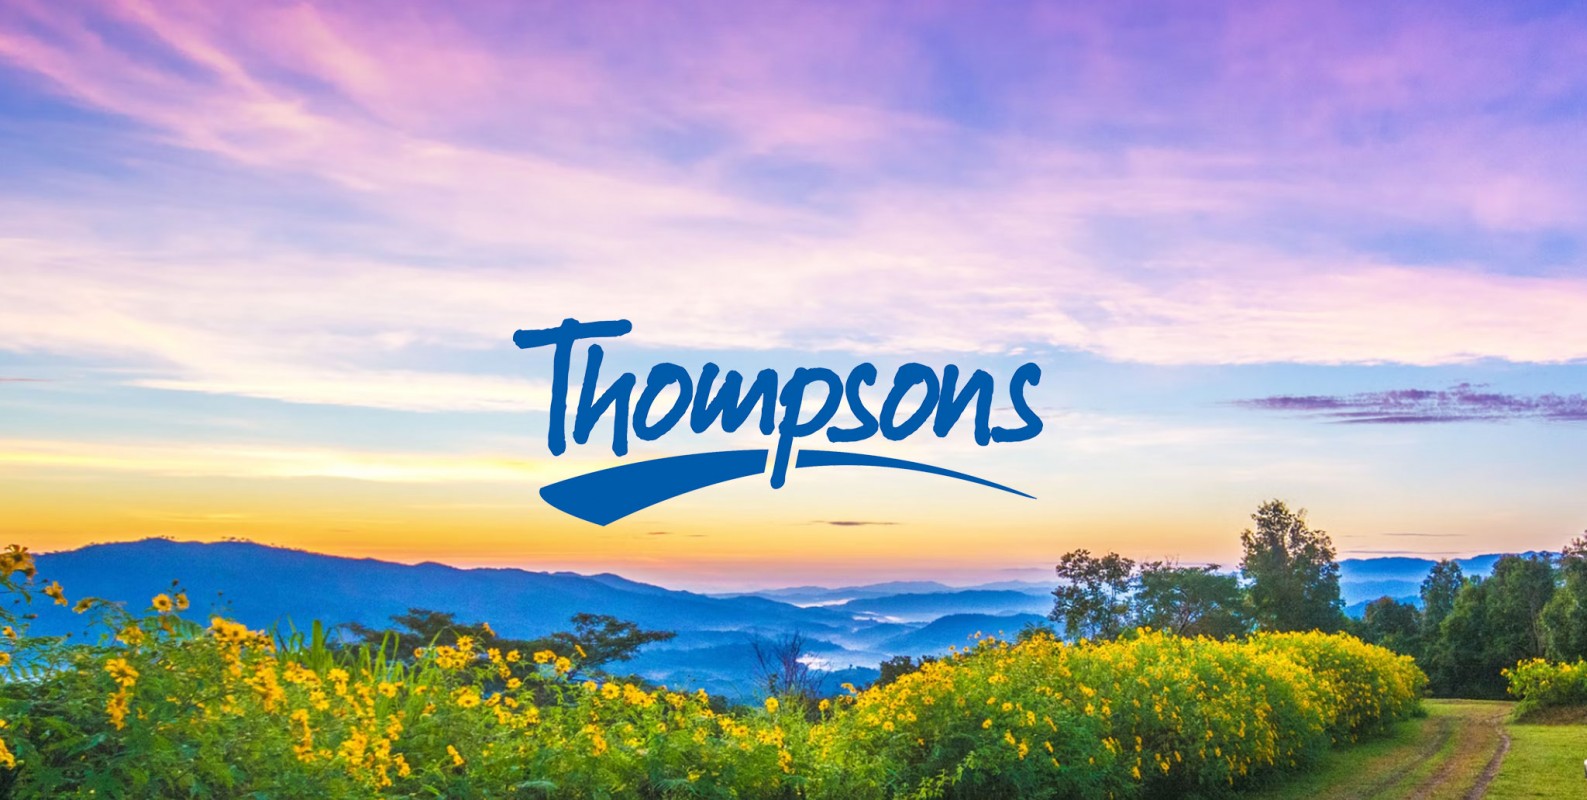 Contact Us Travel Packages Thompsons Holidays